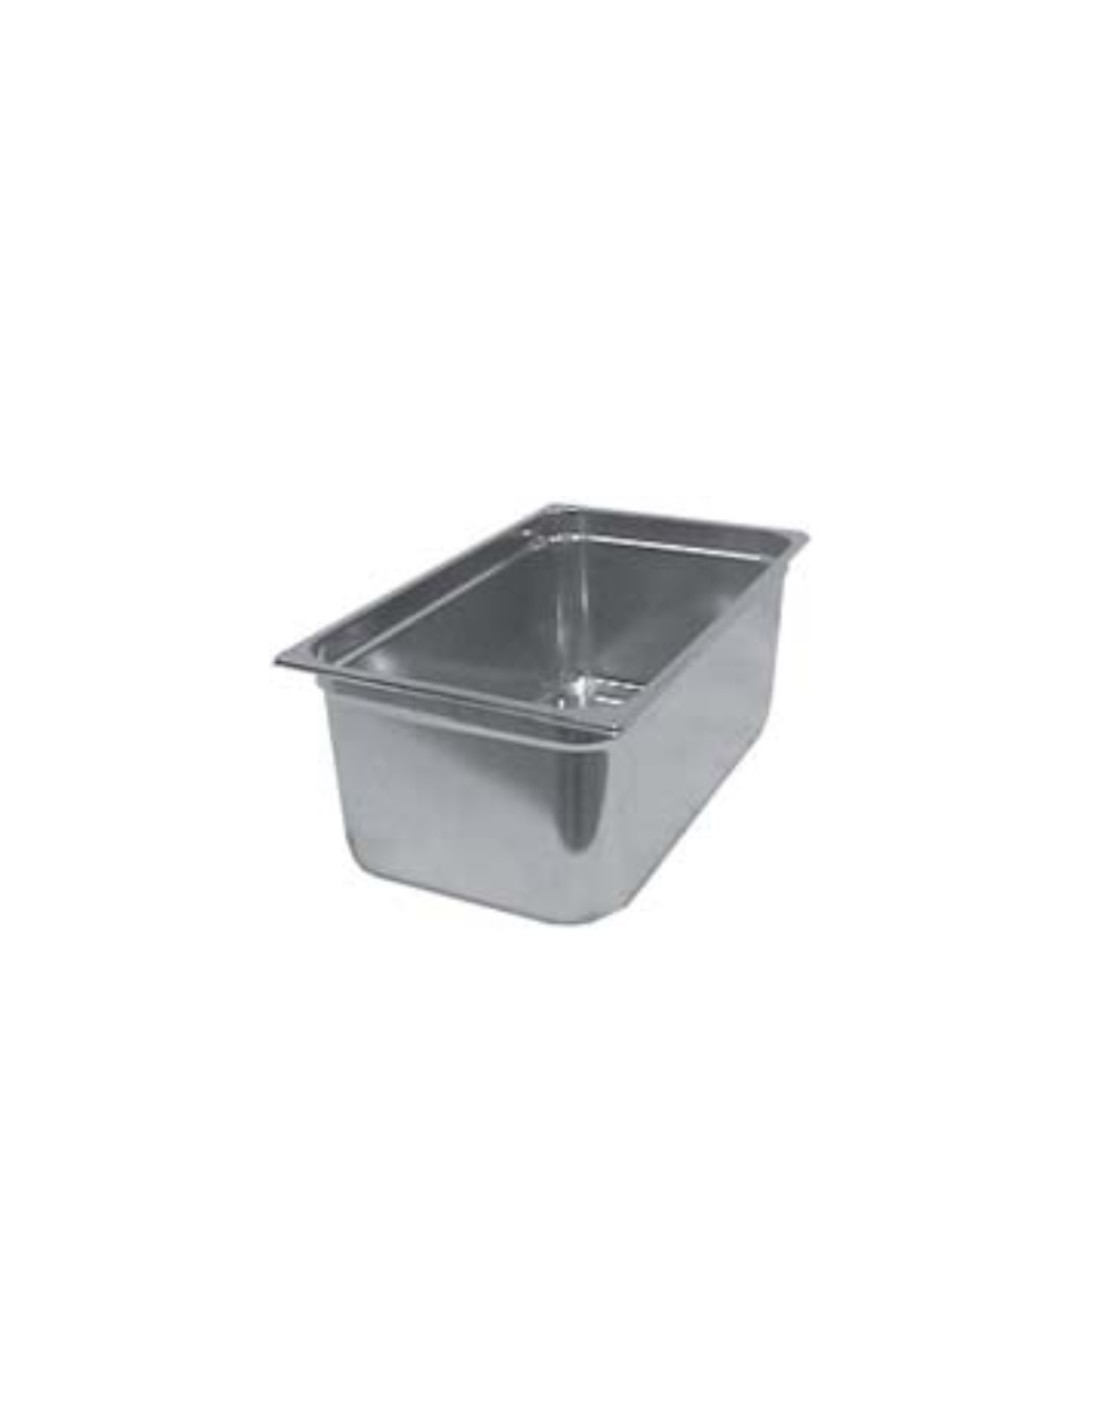 Stainless steel containers for bain-marie - Tank capacity lt 9.5 GN 1/2 - Dimensions 32.5 x 26.5 x 15 cm